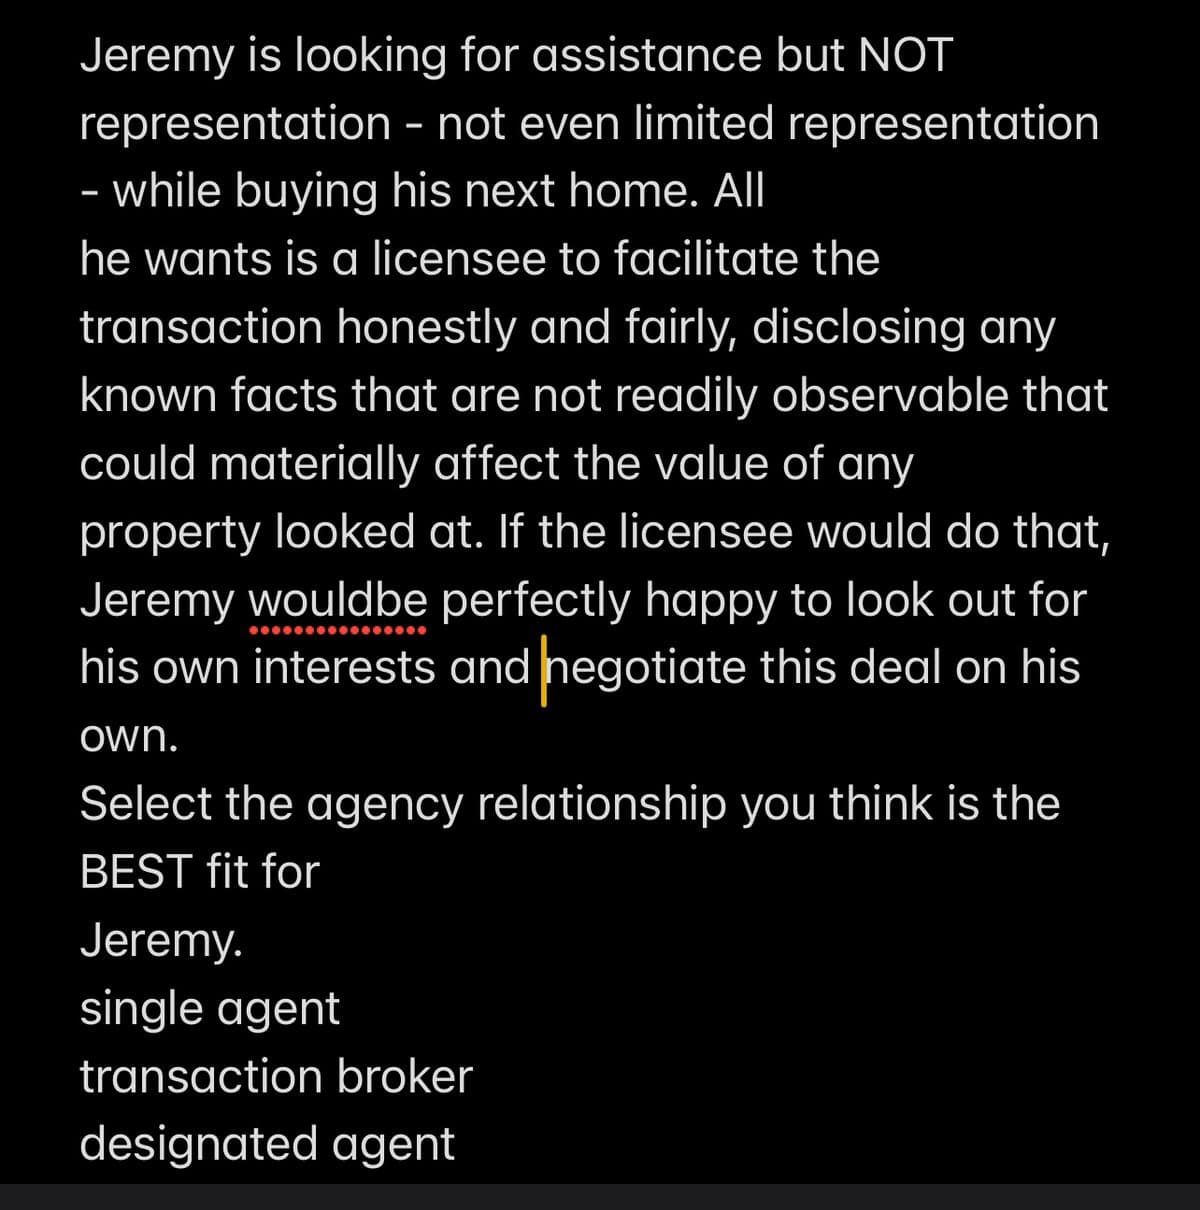 Jeremy is looking for assistance but NOT
representation - not even limited representation
- while buying his next home. All
he wants is a licensee to facilitate the
transaction honestly and fairly, disclosing any
known facts that are not readily observable that
could materially affect the value of any
property looked at. If the licensee would do that,
Jeremy would be perfectly happy to look out for
his own interests and negotiate this deal on his
own.
Select the agency relationship you think is the
BEST fit for
Jeremy.
single agent
transaction broker
designated agent